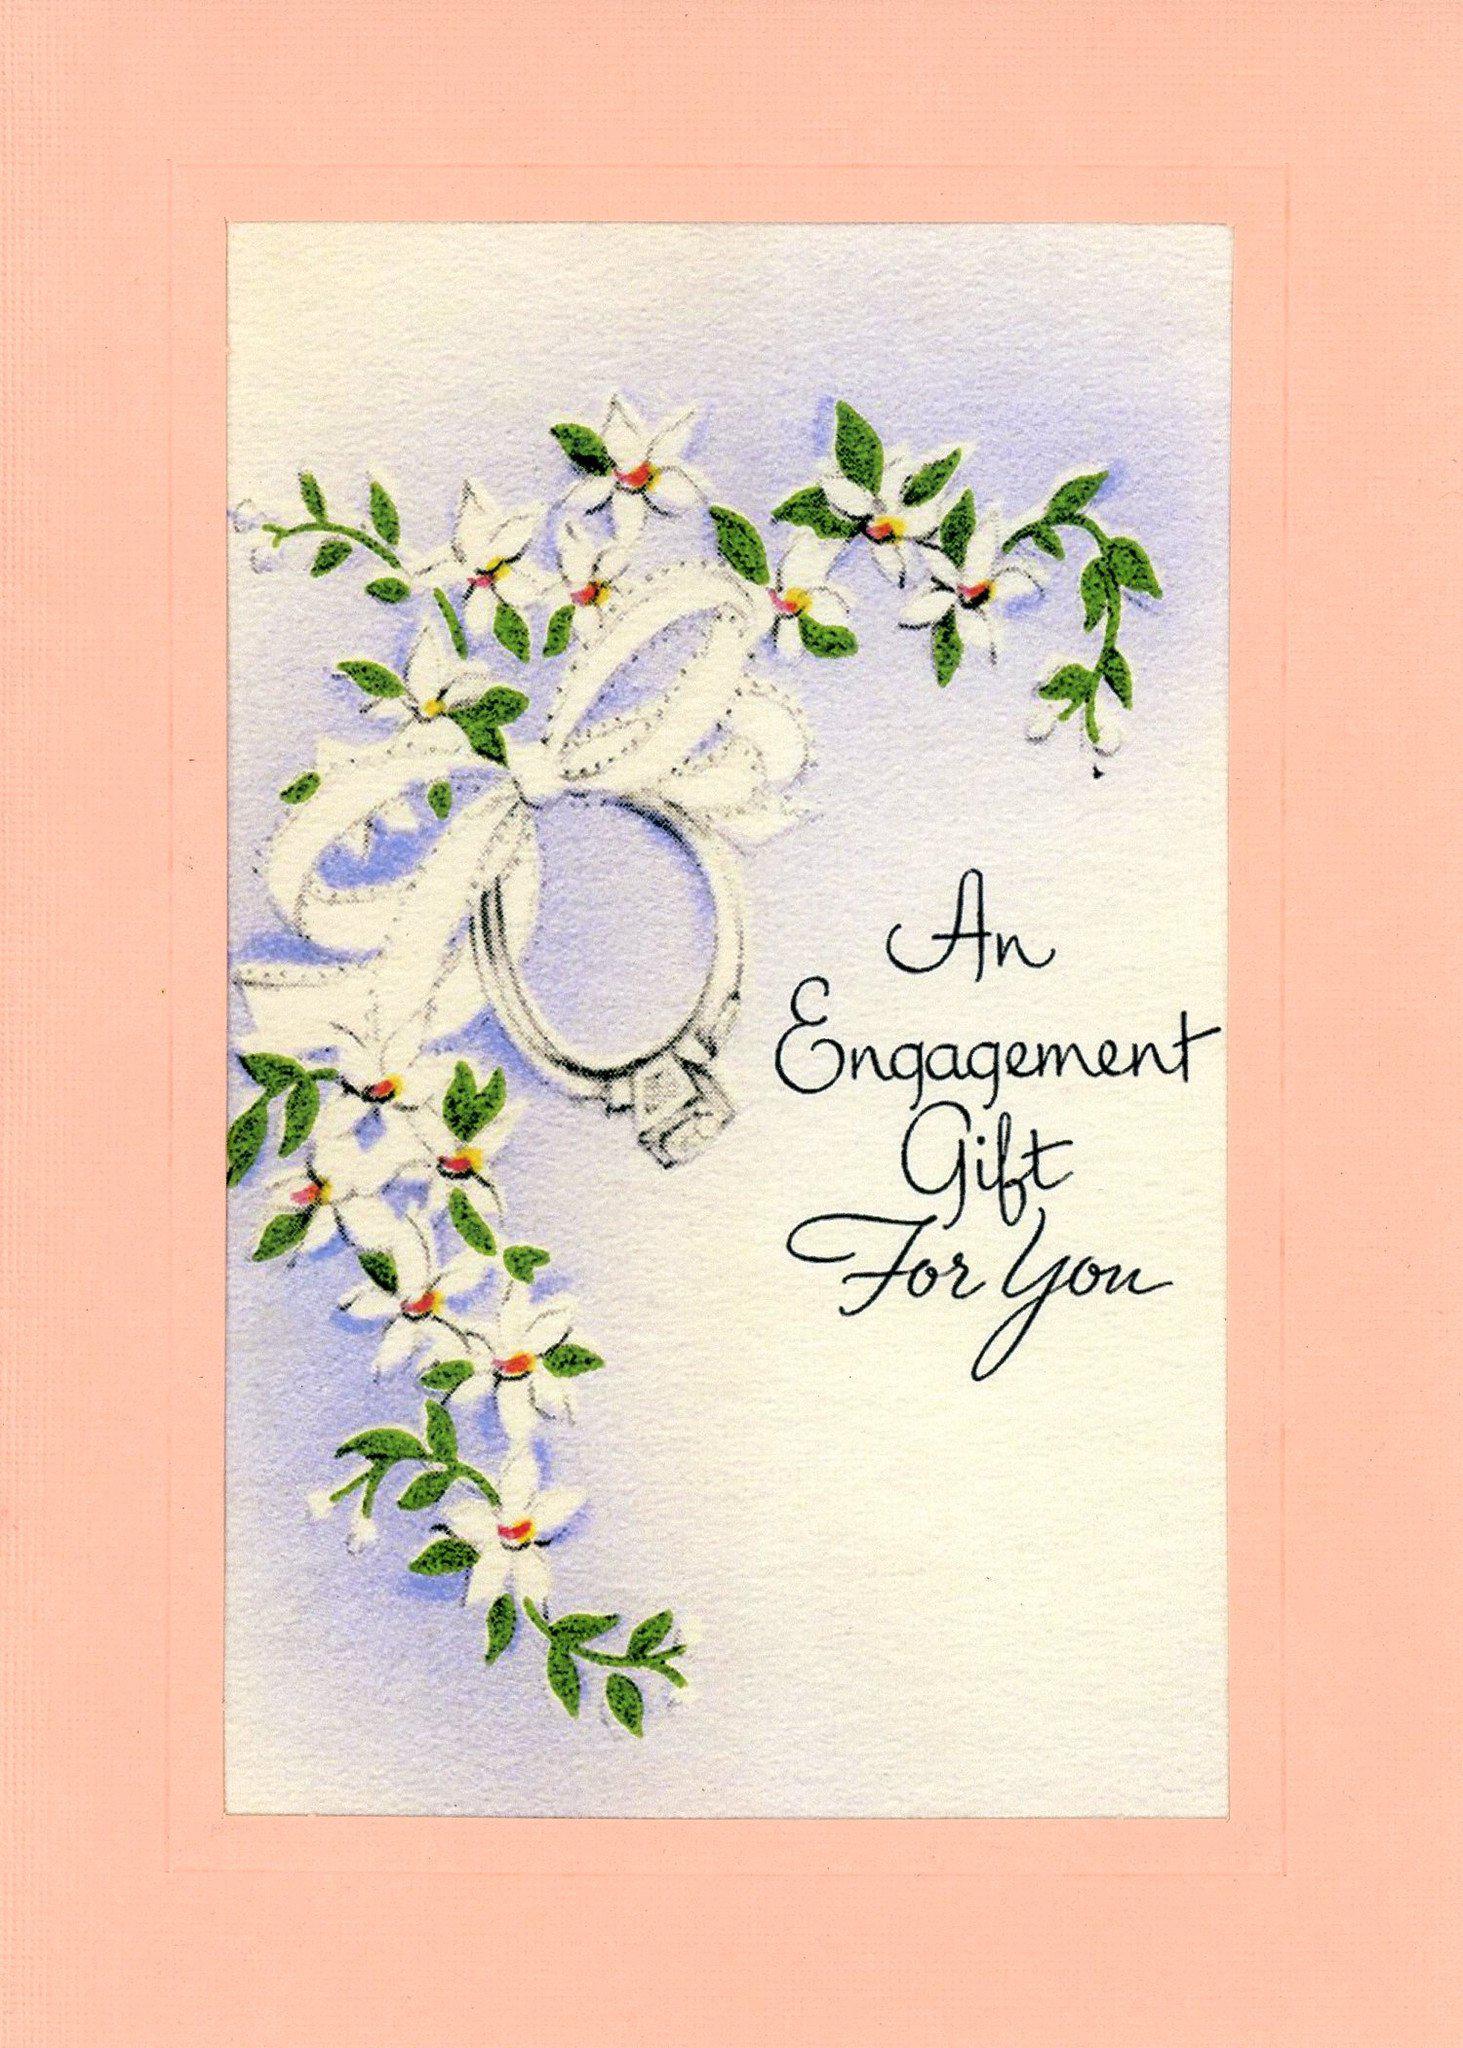 An Engagement Gift for You-Greetings from the Past-Plymouth Cards